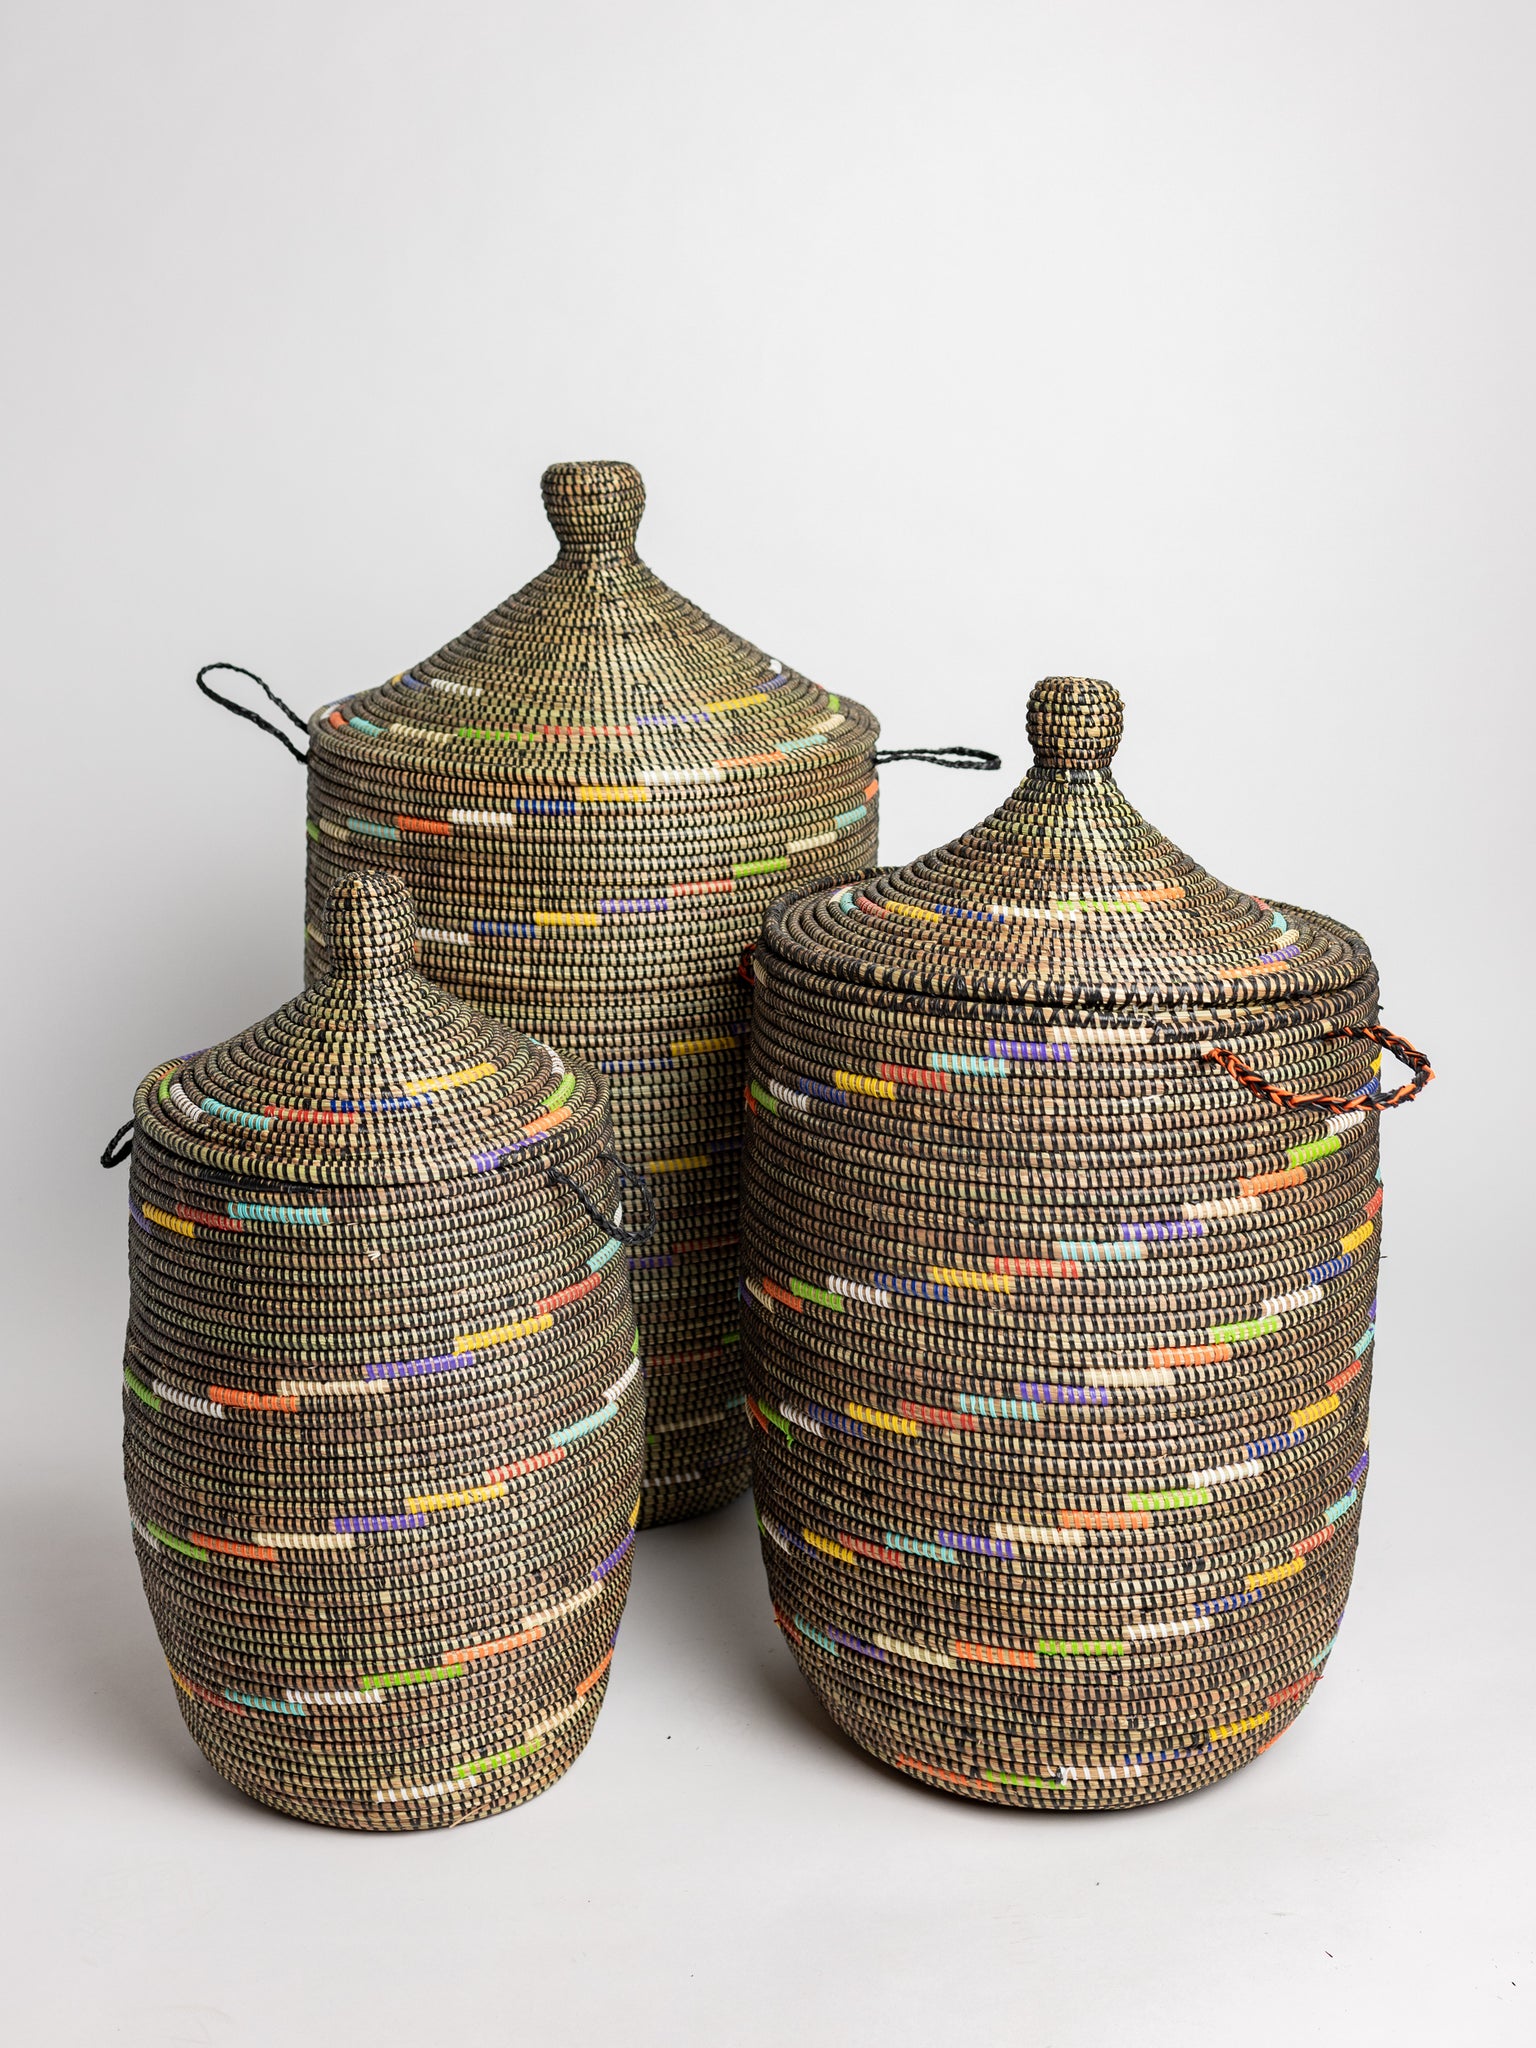 Baskets - 3 nesting sizes with design and handmade in West Africa